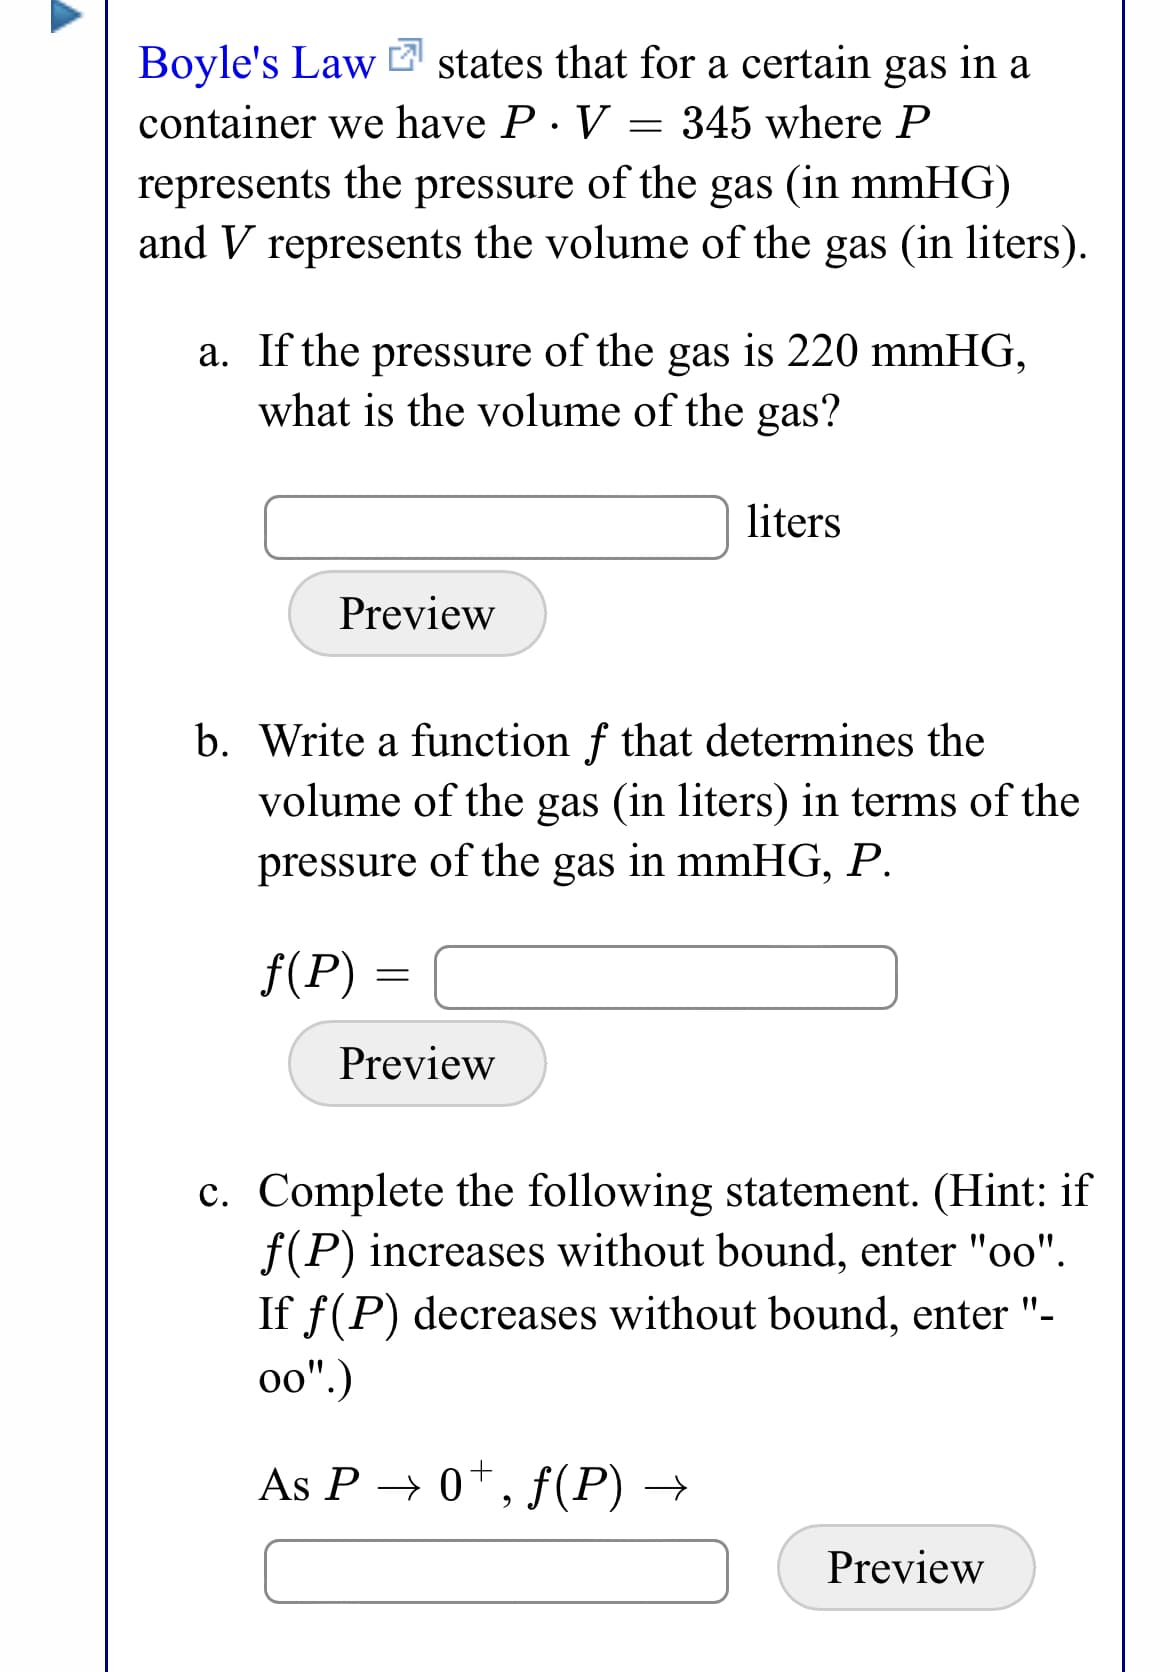 Boyle's Law states that for a certain gas in a
container we have P· V = 345 where P
represents the pressure of the gas (in mmHG)
and V represents the volume of the gas (in liters).
a. If the pressure of the gas is 220 mmHG,
what is the volume of the gas?
liters
Preview
b. Write a function f that determines the
volume of the gas (in liters) in terms of the
pressure of the gas in mmHG, P.
f(P) =
Preview
c. Complete the following statement. (Hint: if
f(P) increases without bound, enter "oo".
If f(P) decreases without bound, enter "-
o0".)
As P → 0*, f(P) →
Preview
